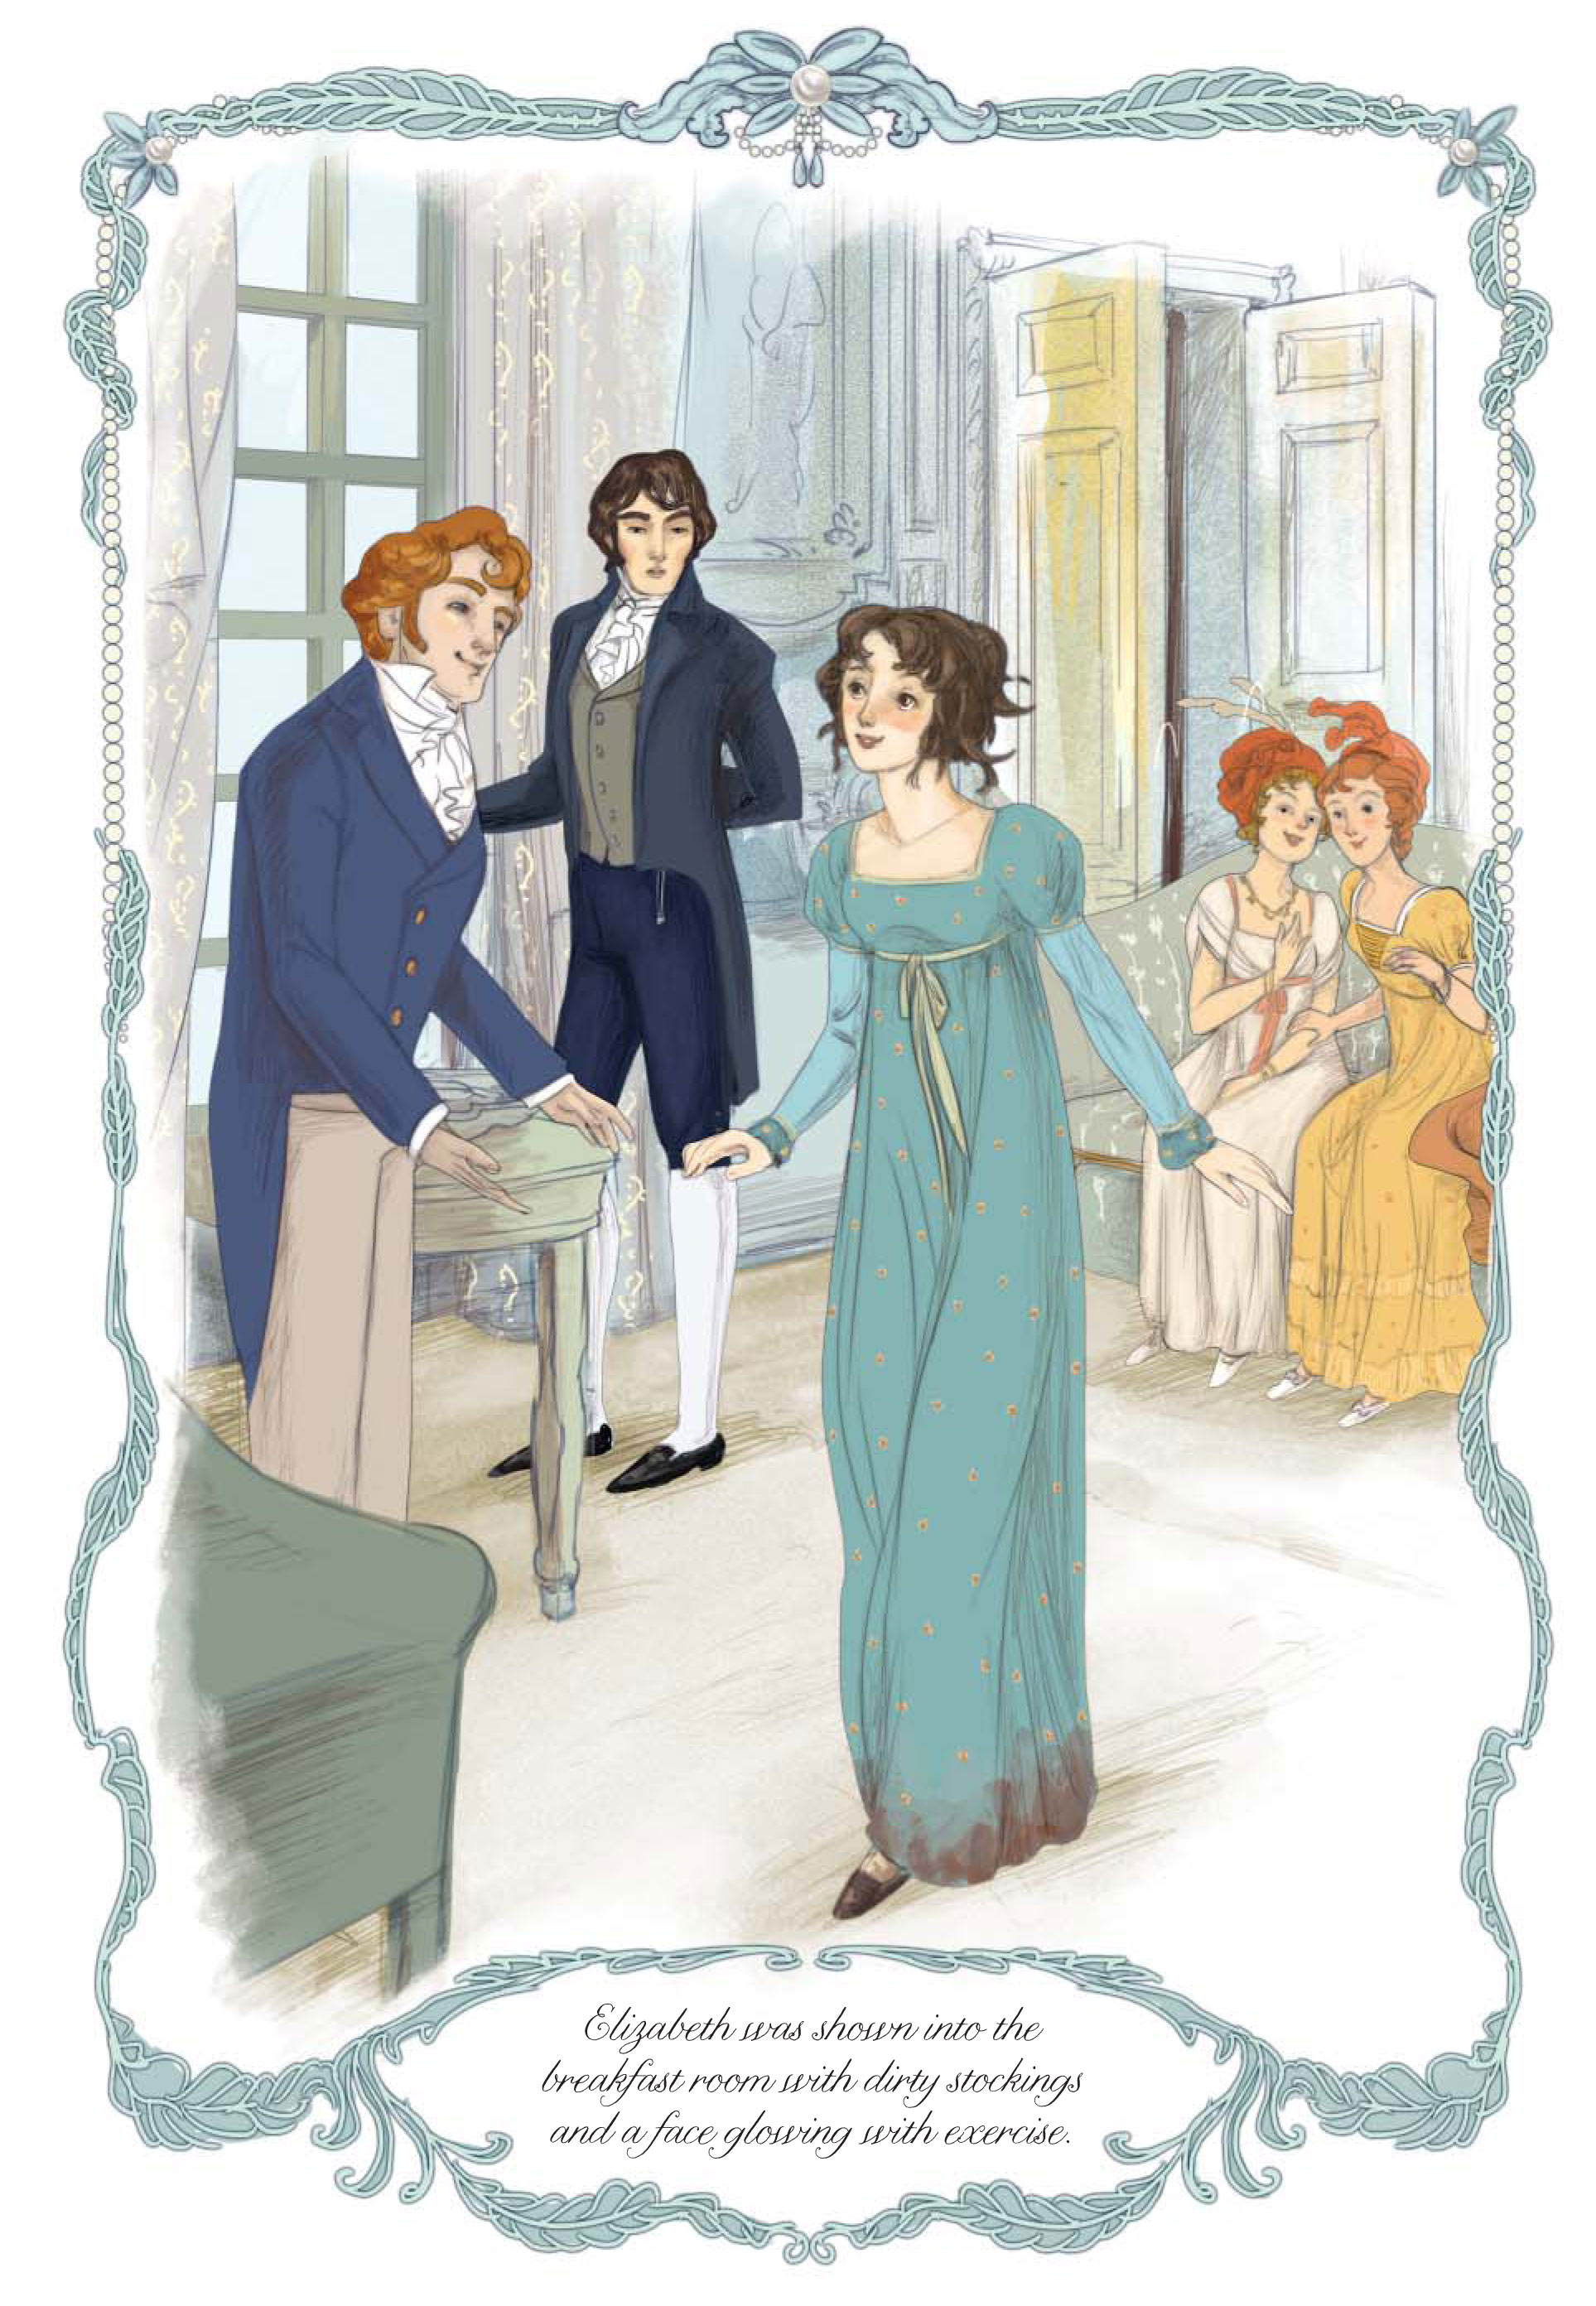 Illustration from Pride and Prejudice, adapted in The Complete Jane Austen